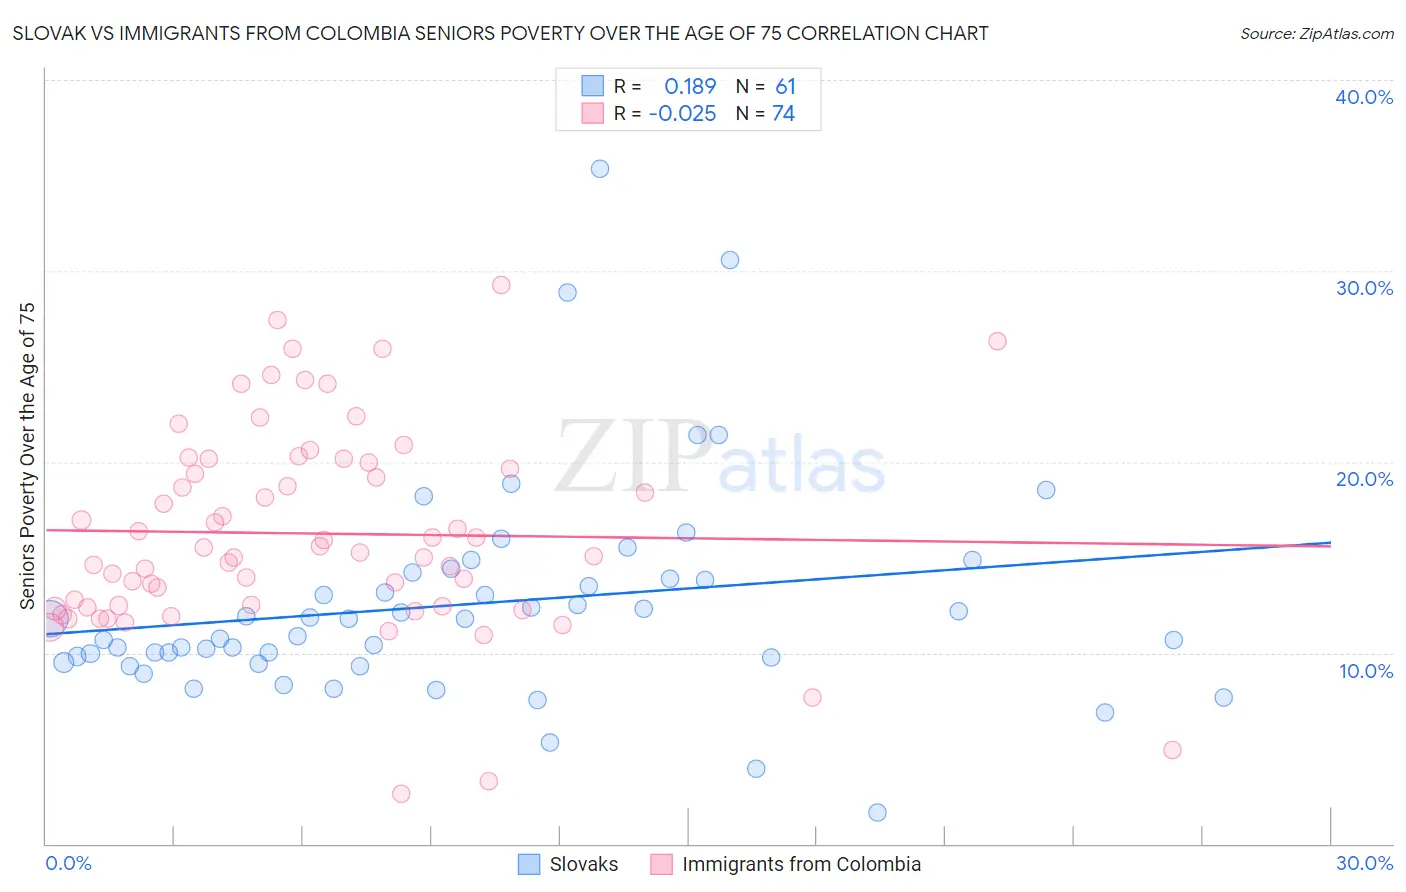 Slovak vs Immigrants from Colombia Seniors Poverty Over the Age of 75